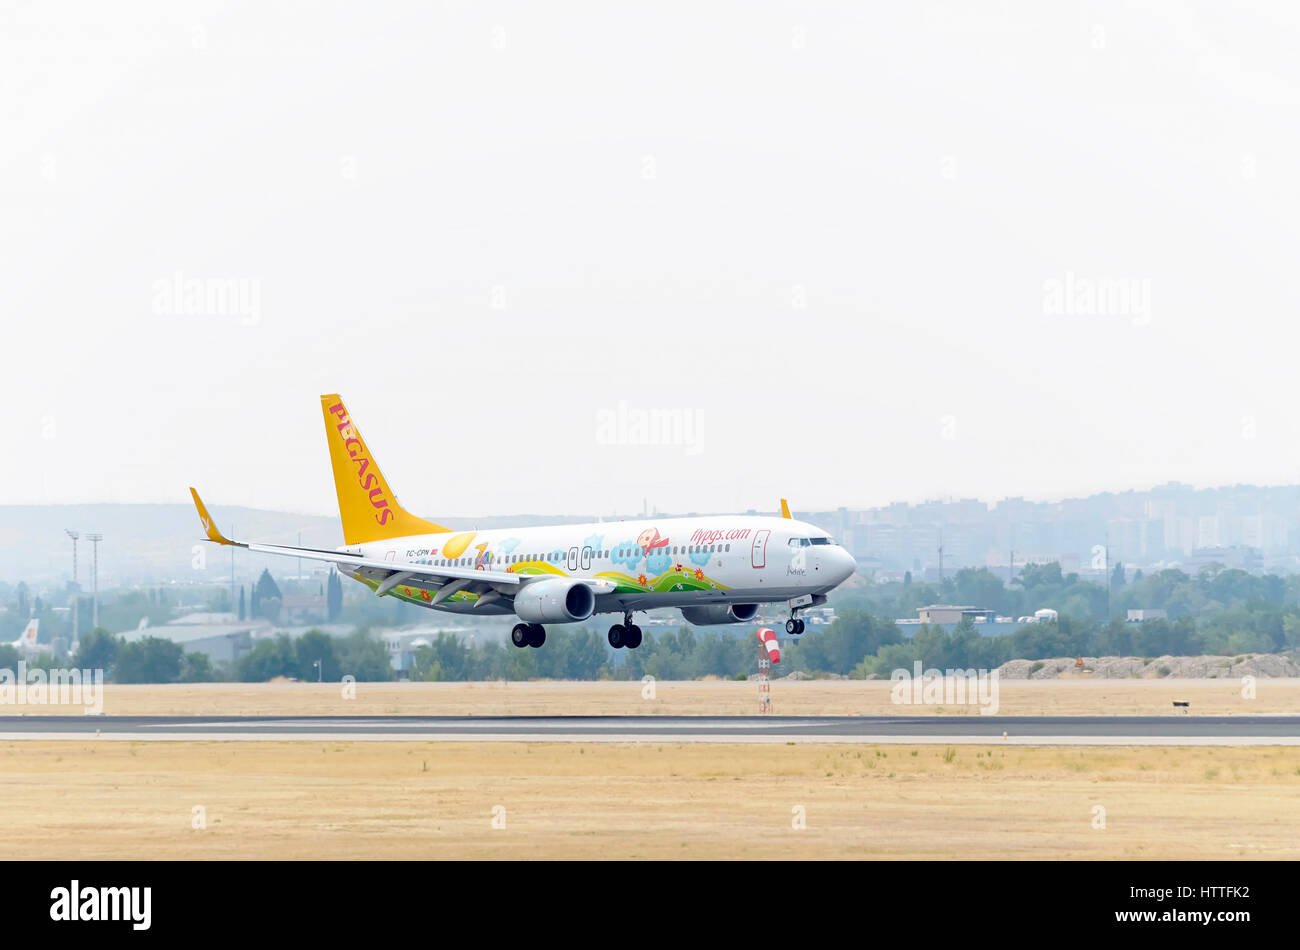 Plane Boeing 737, of Pegasus Airlines airline, is landing on Madrid - Barajas, Adolfo Suarez airport. Turkish low-cost flights. Cloudy day of summer. Stock Photo